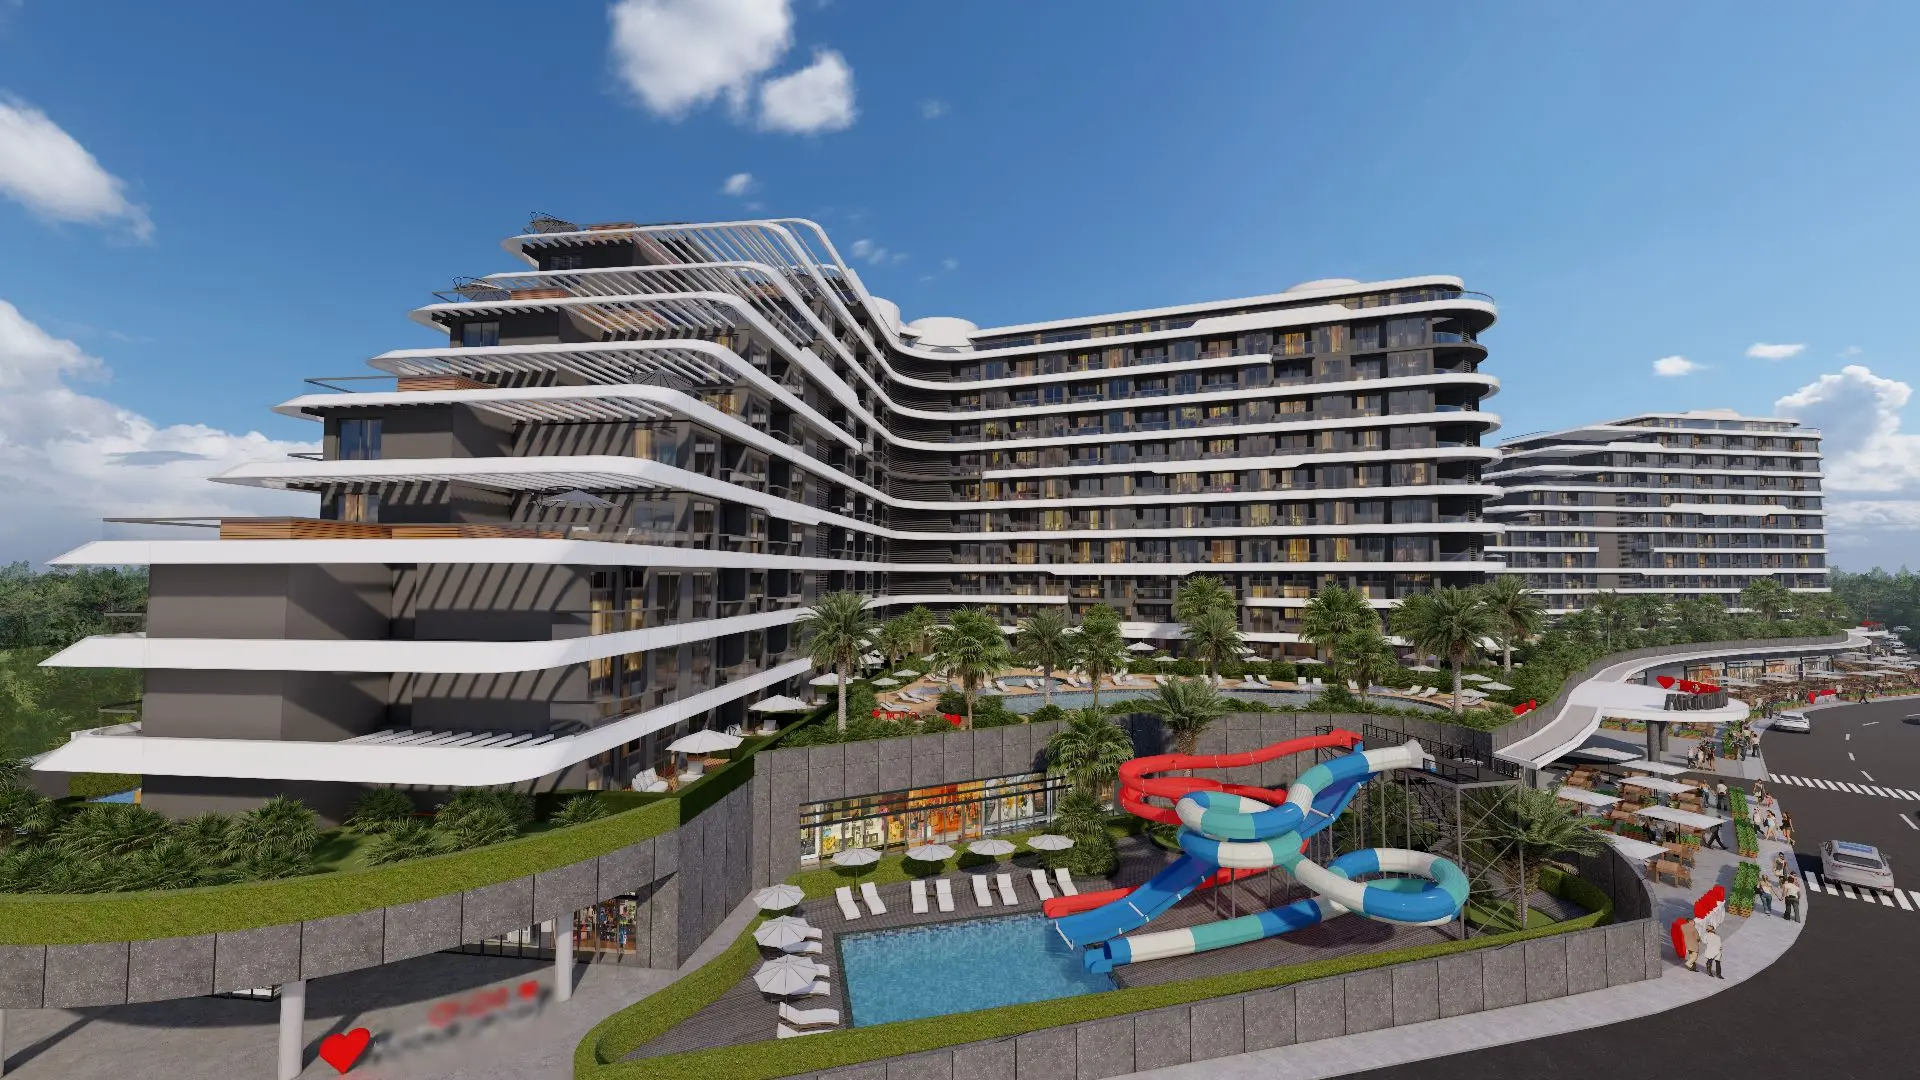 AMAZING NEW HOUSING PROJECT IN ANTALYA